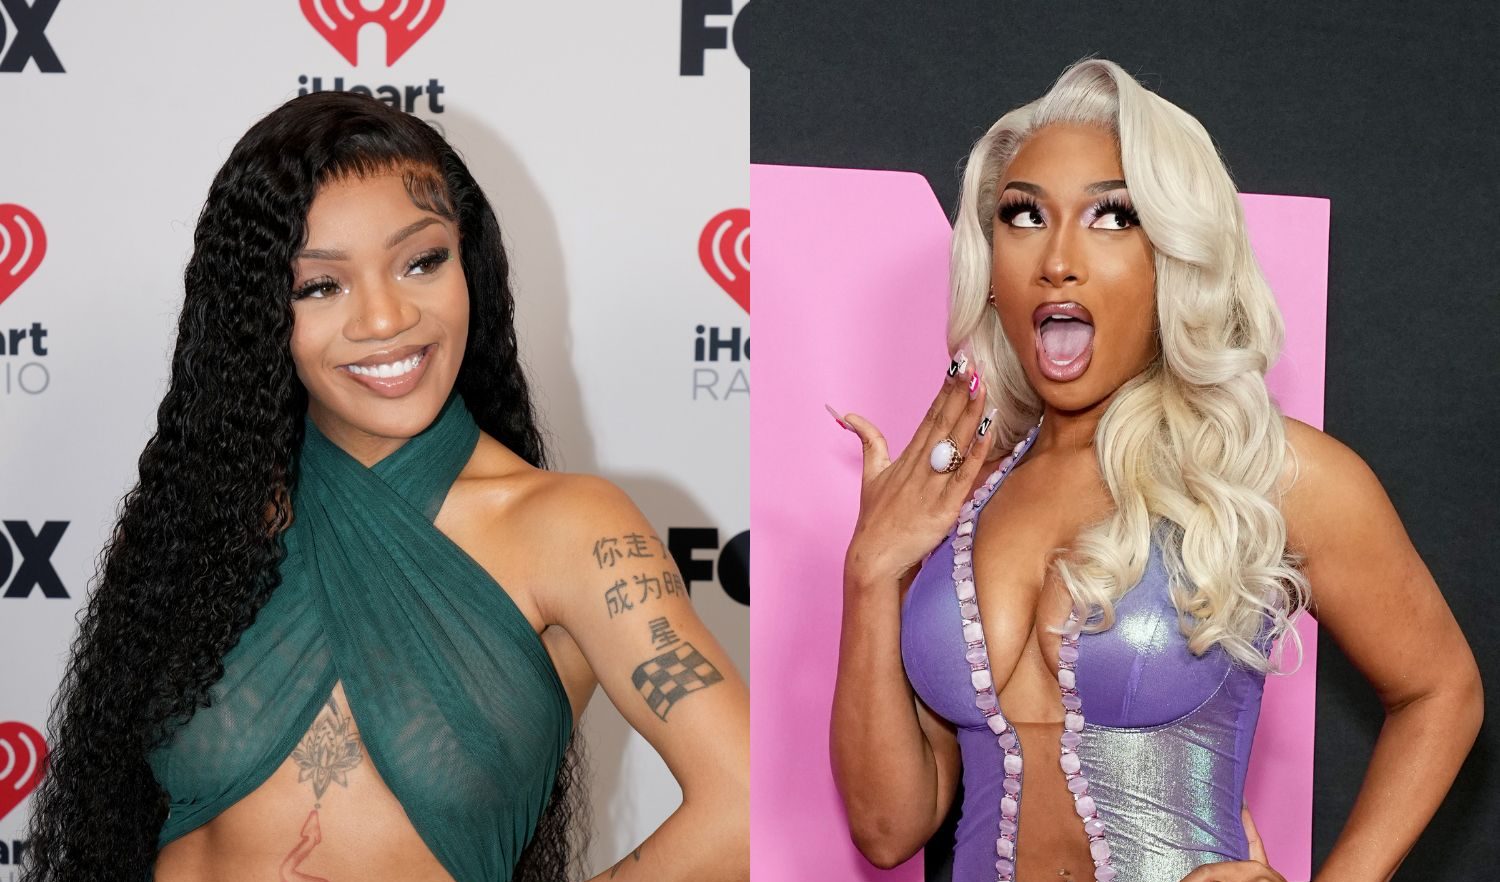 Let’s Gooo! Social Media Goes Nuts After GloRilla Teased Collab Track With Megan Thee Stallion (Video) thumbnail